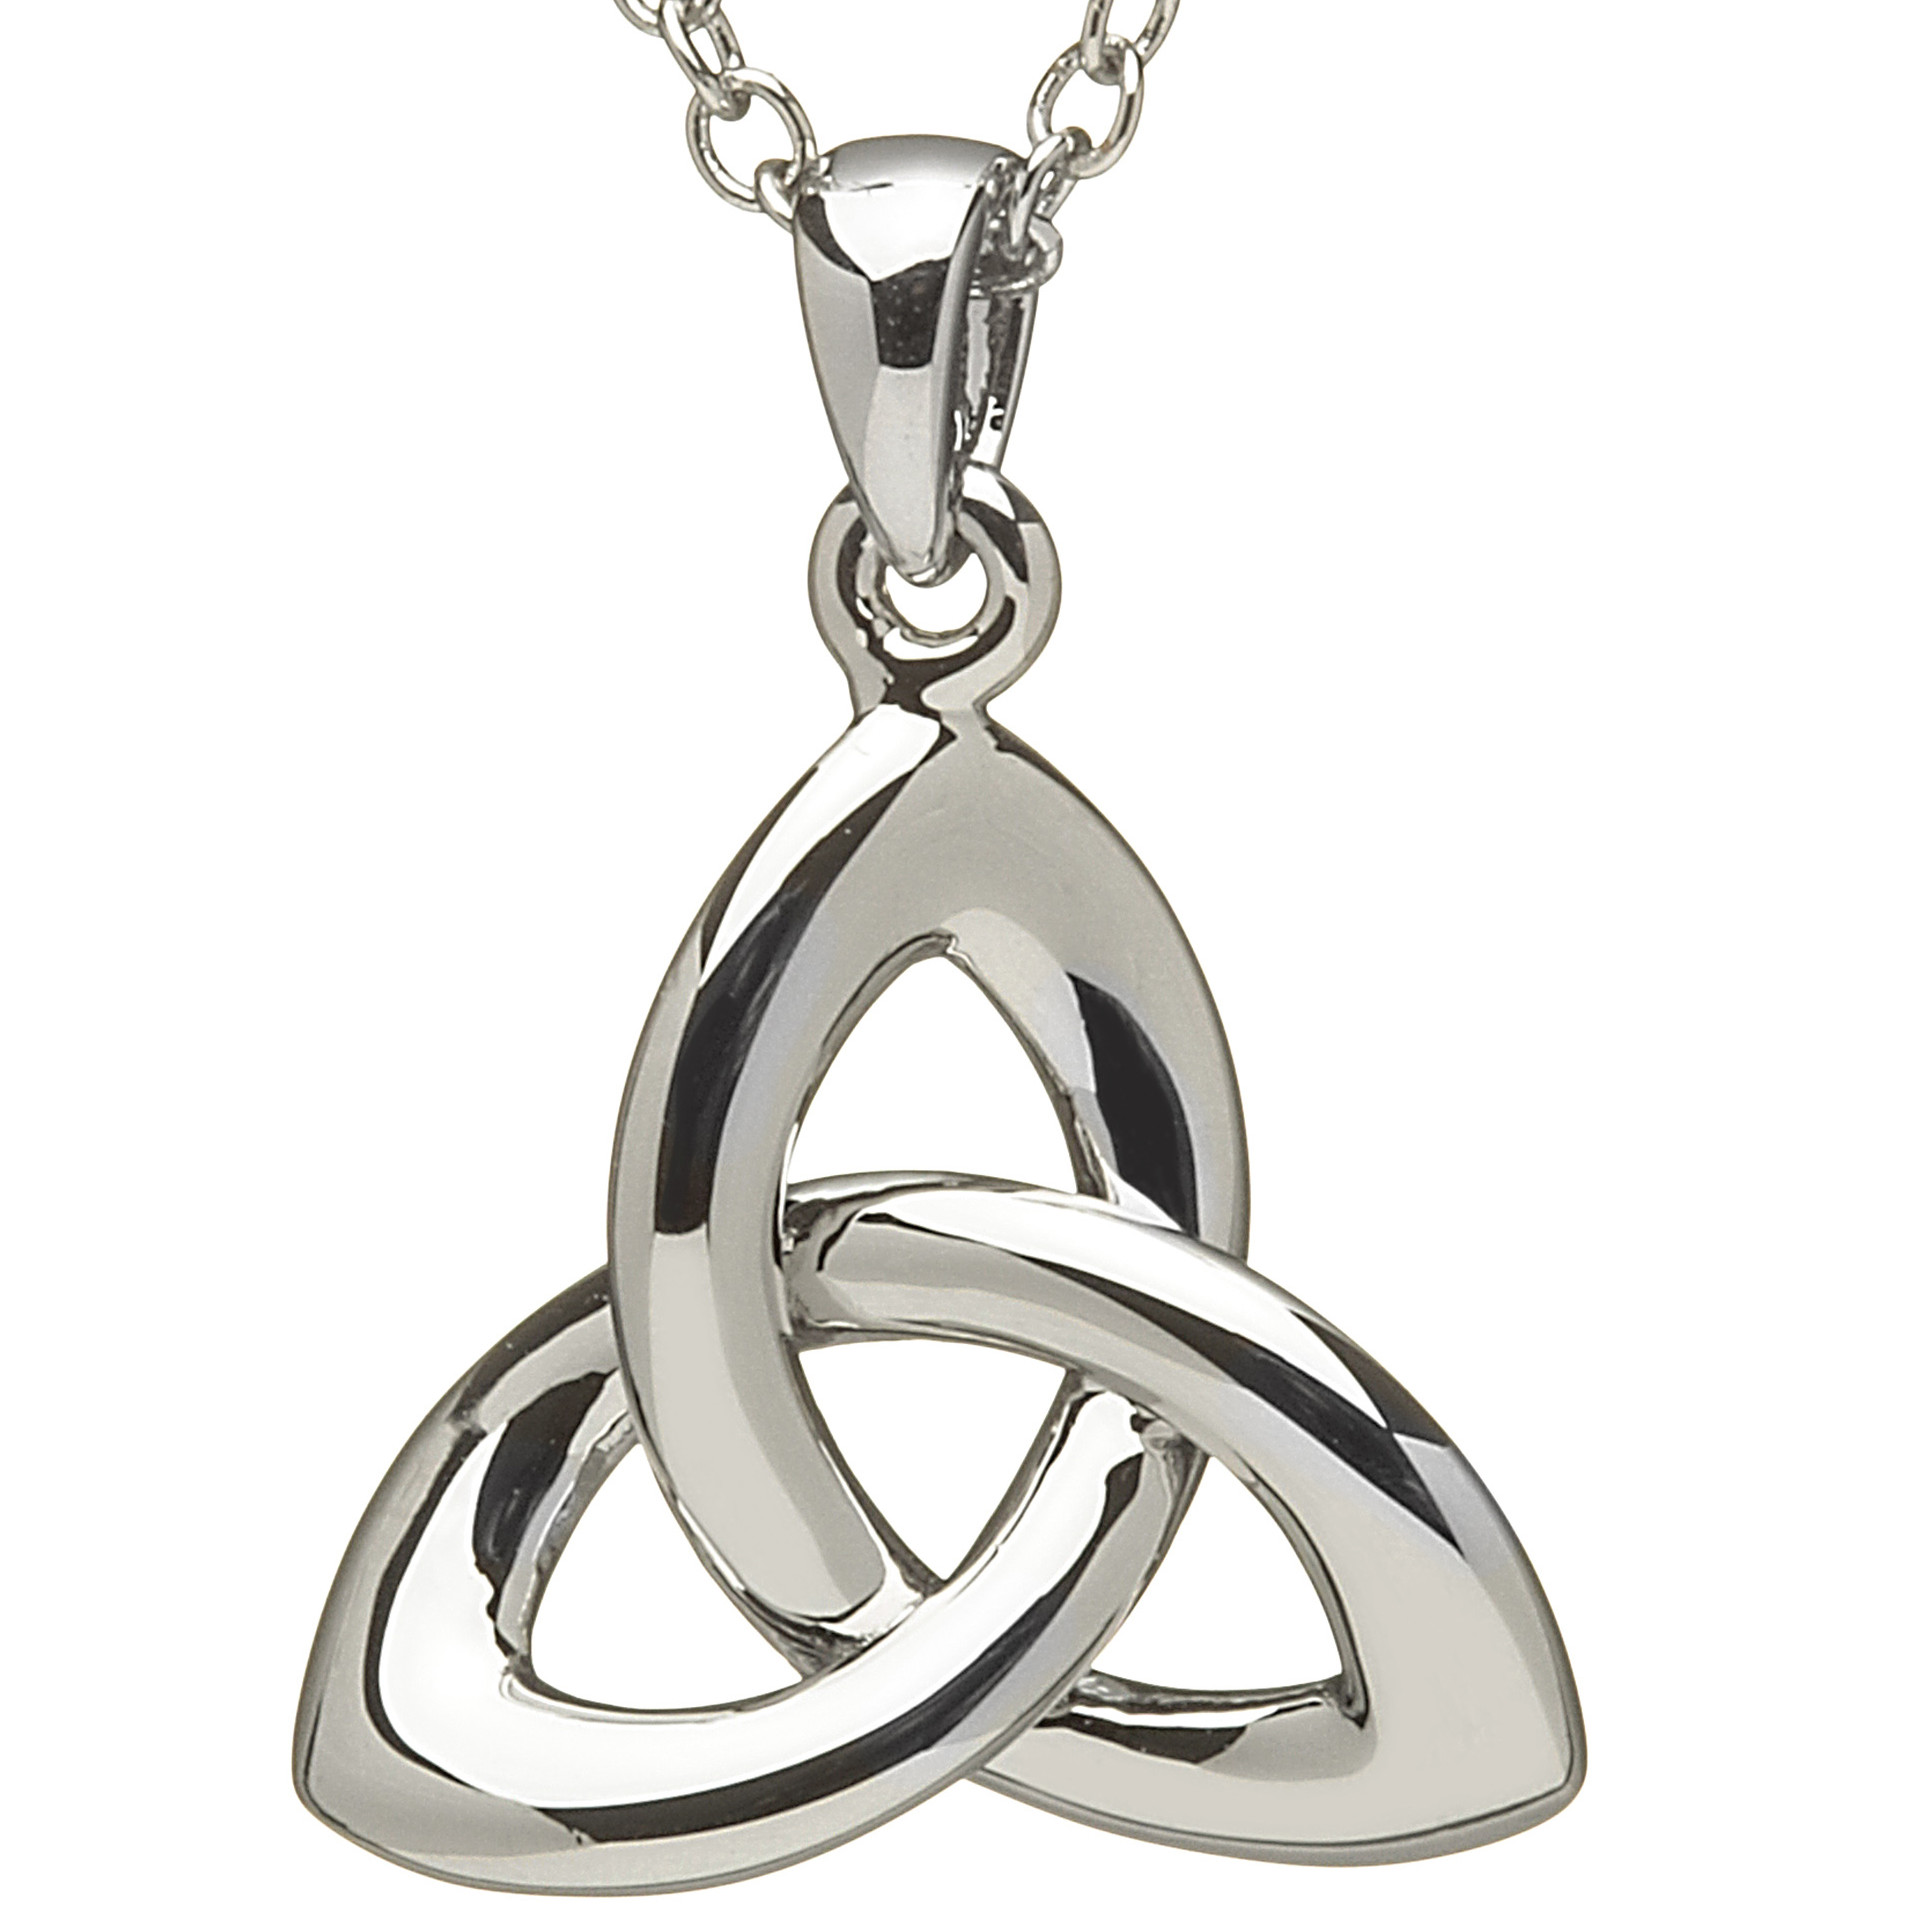 Product image for Trinity Knot Pendant - Sterling Silver Celtic Trinity Knot Pendant with Chain